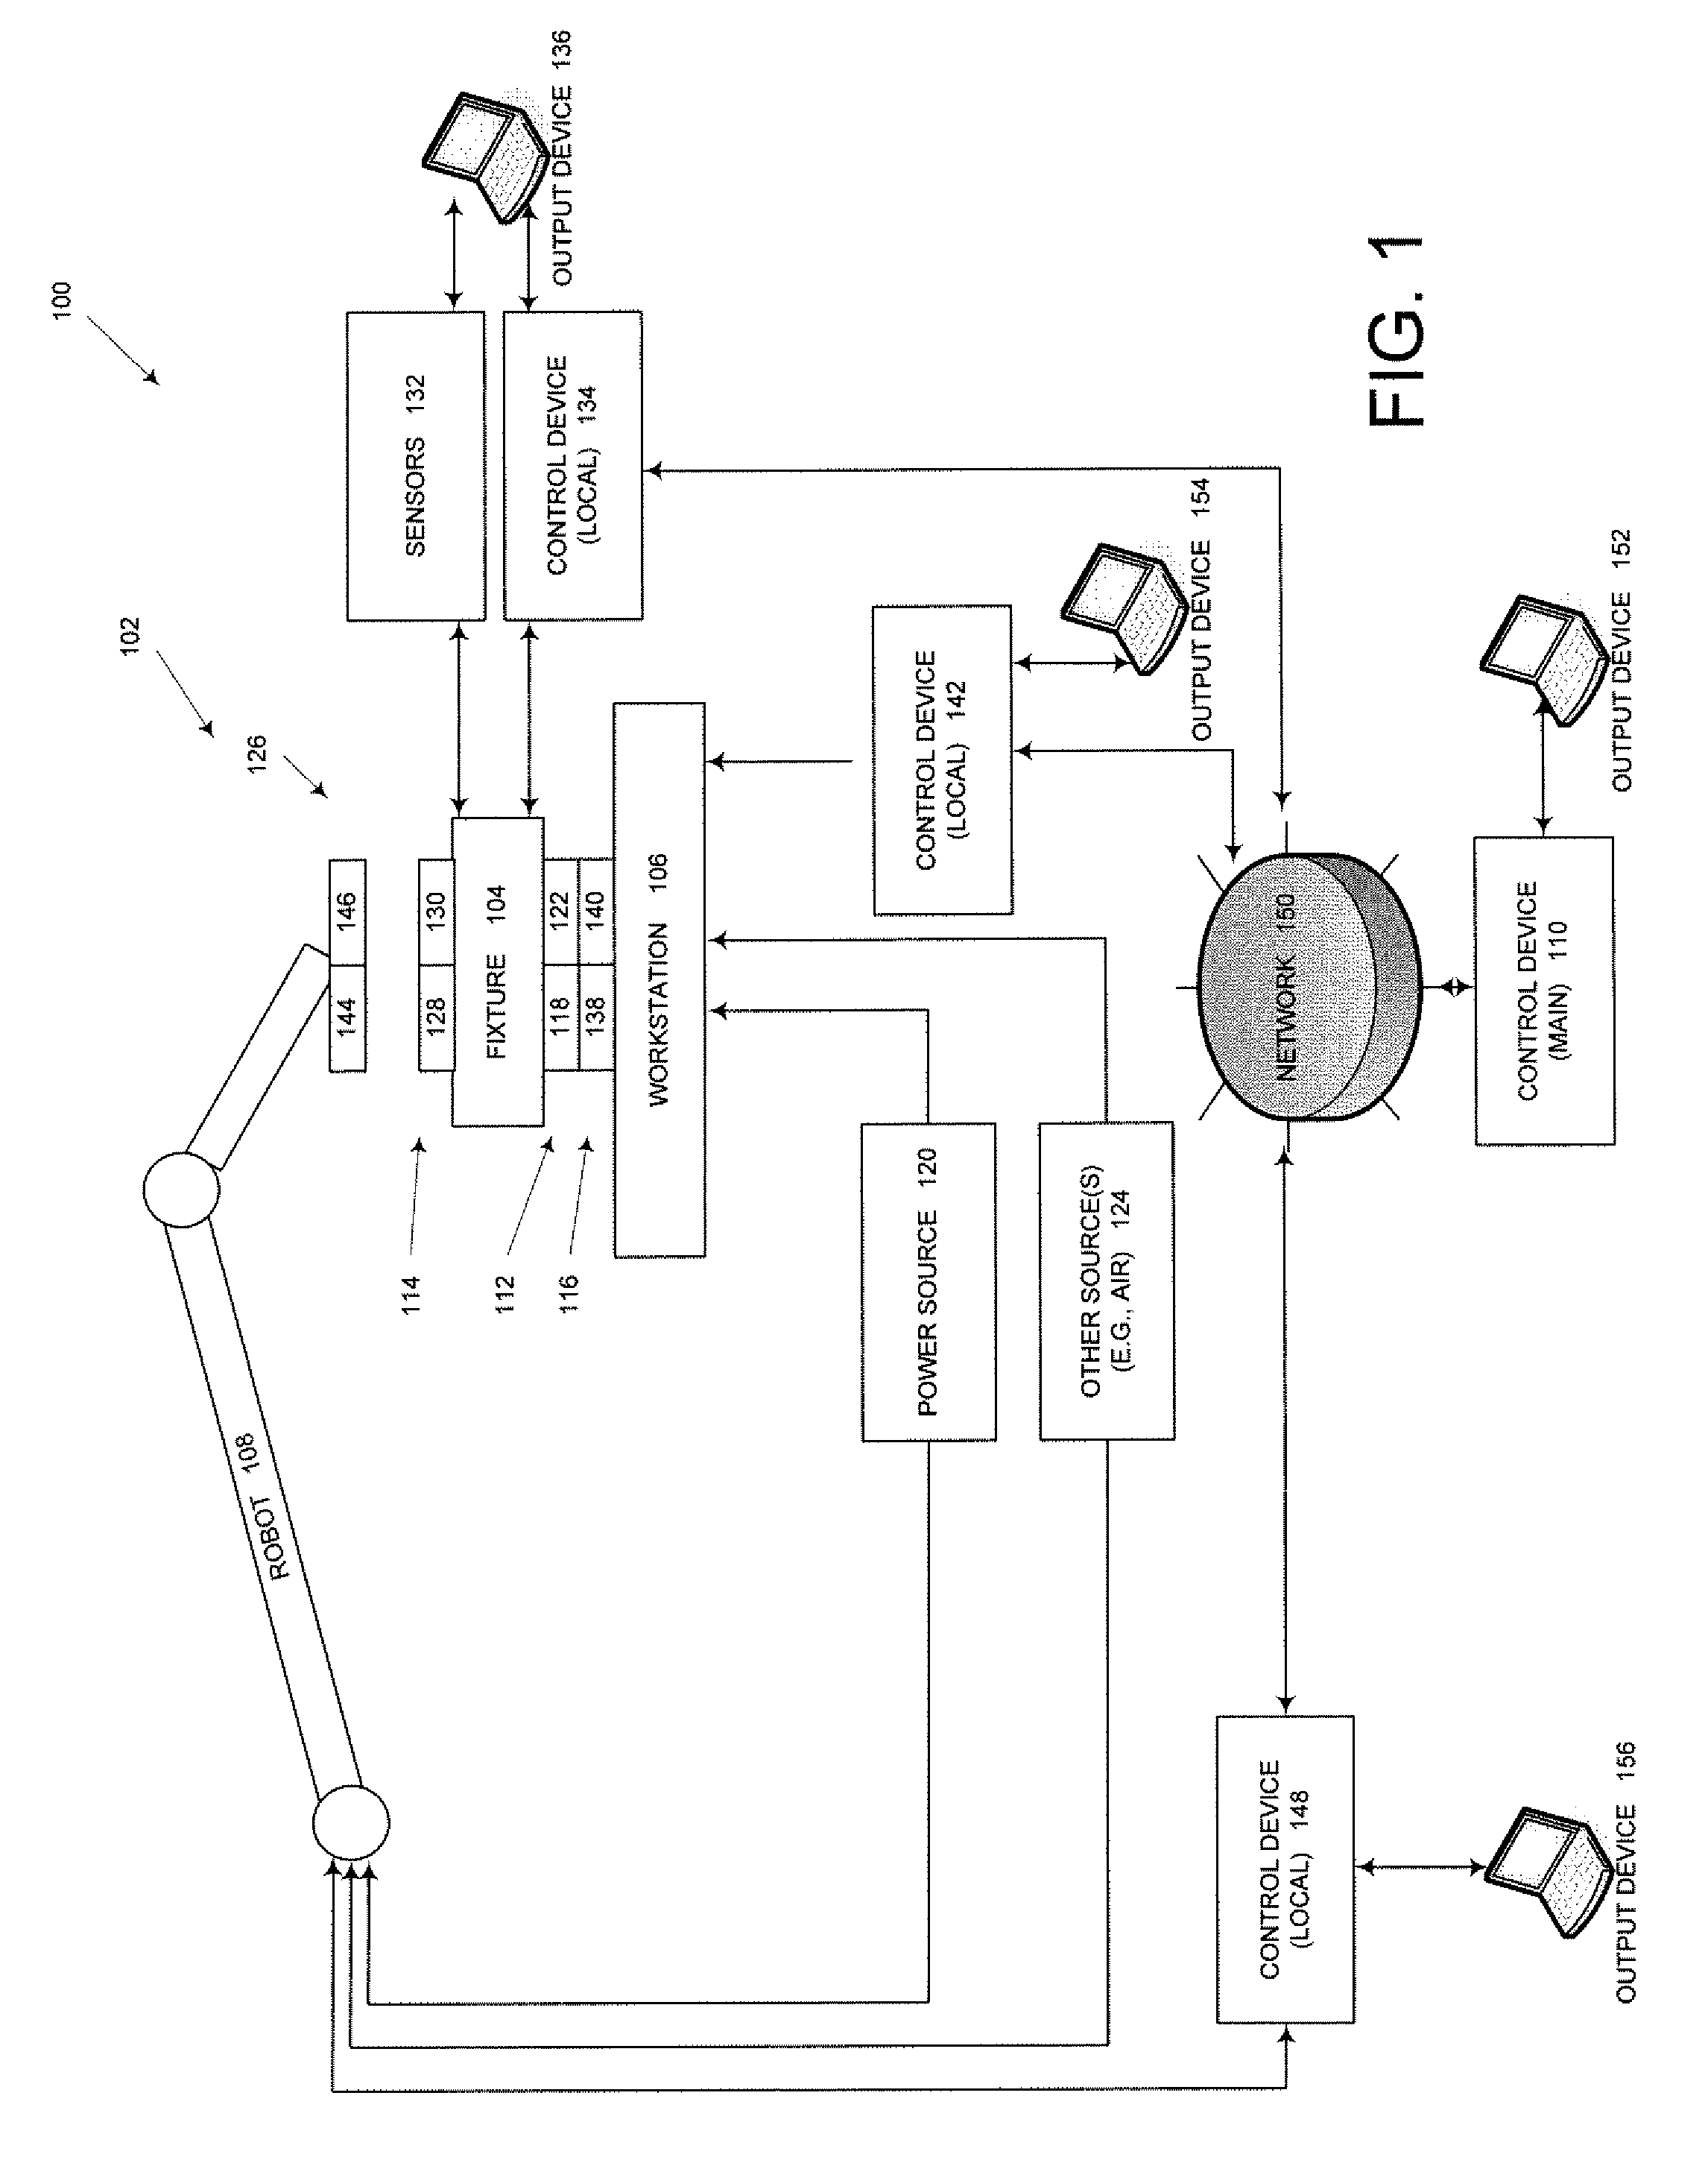 Systems, methods, and apparatus for providing continuous power to a fixture in a manufacturing process